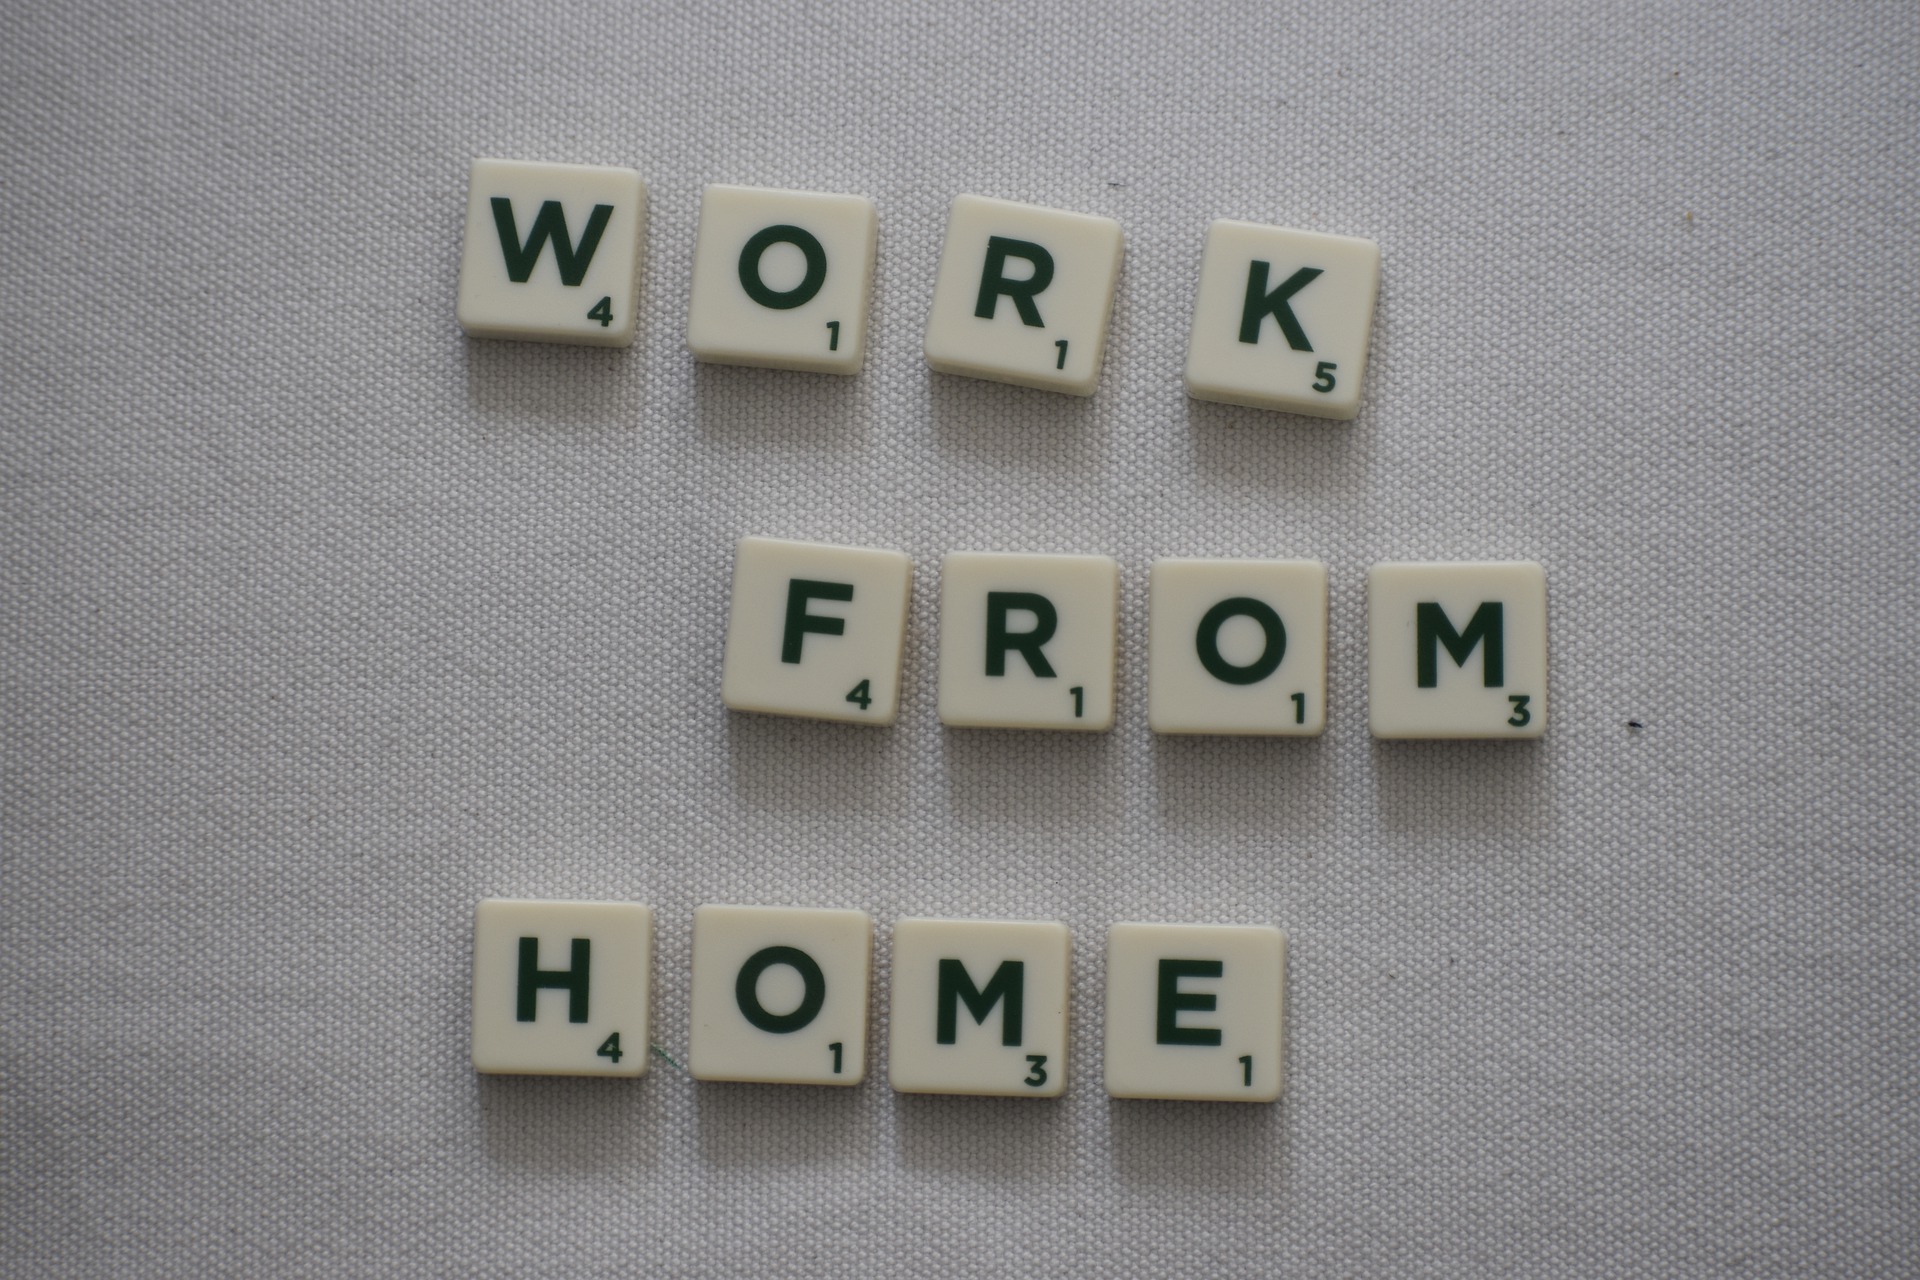 3 Great things about working from home